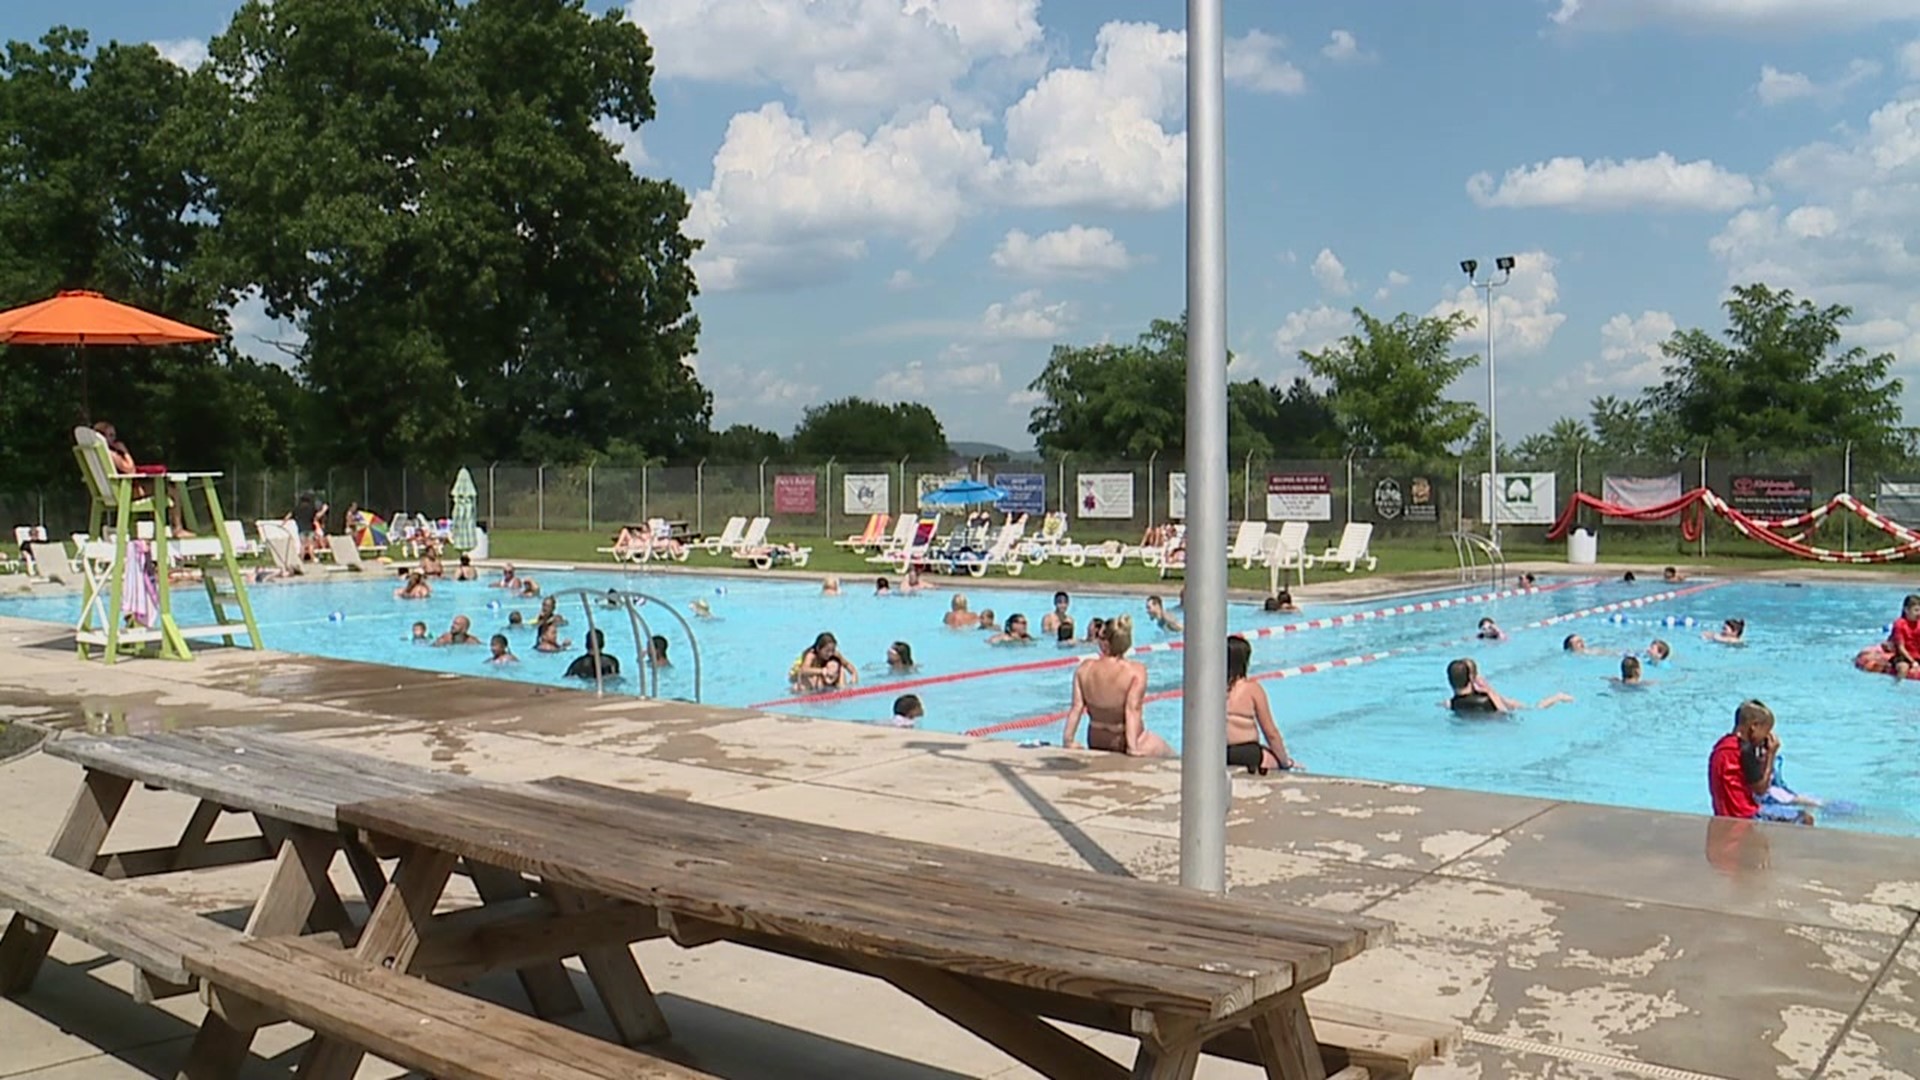 Folks near Berwick beat the heat by going for a swim. Newswatch 16s Chris Keating shows us how hundreds cooled off by the pool.